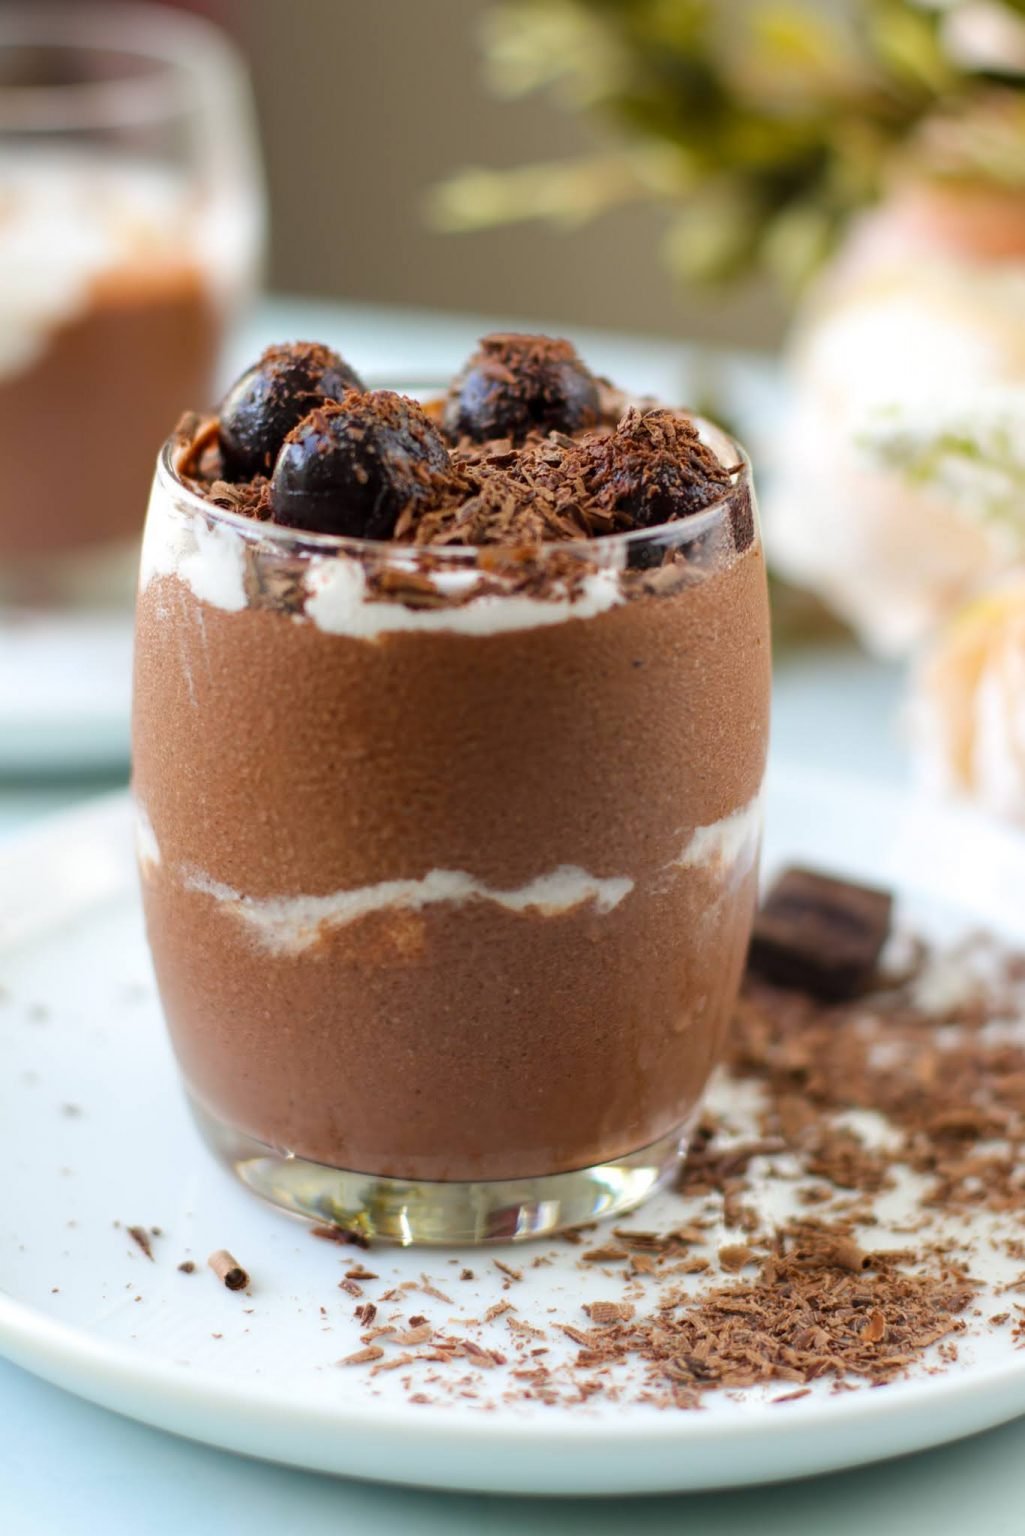 Chia Seed Chocolate Mousse Pudding Recipe - Niola Blooms